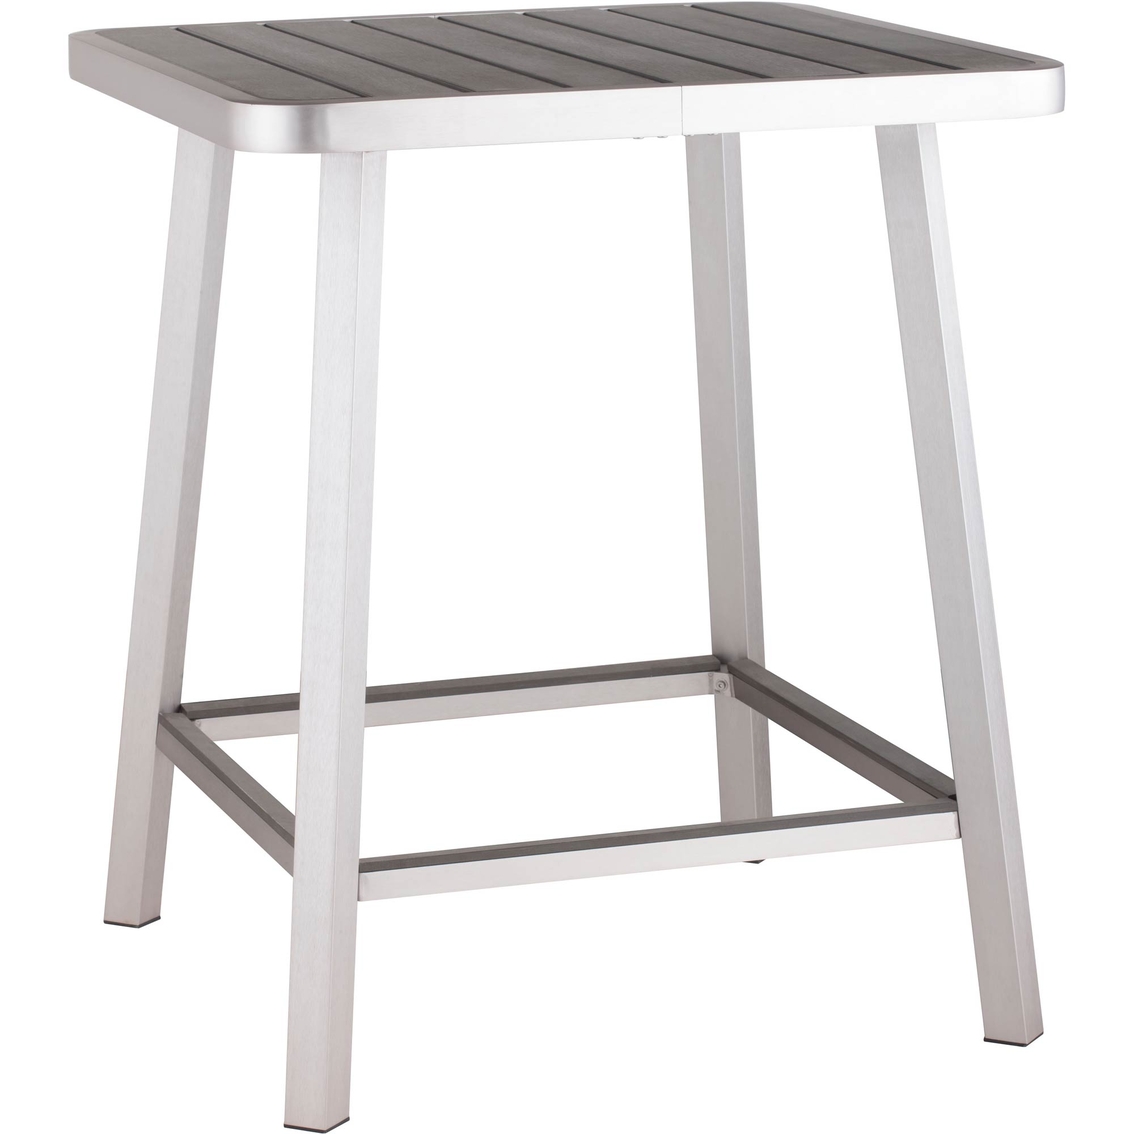 Zuo Megapolis Bar Table - Image 2 of 3